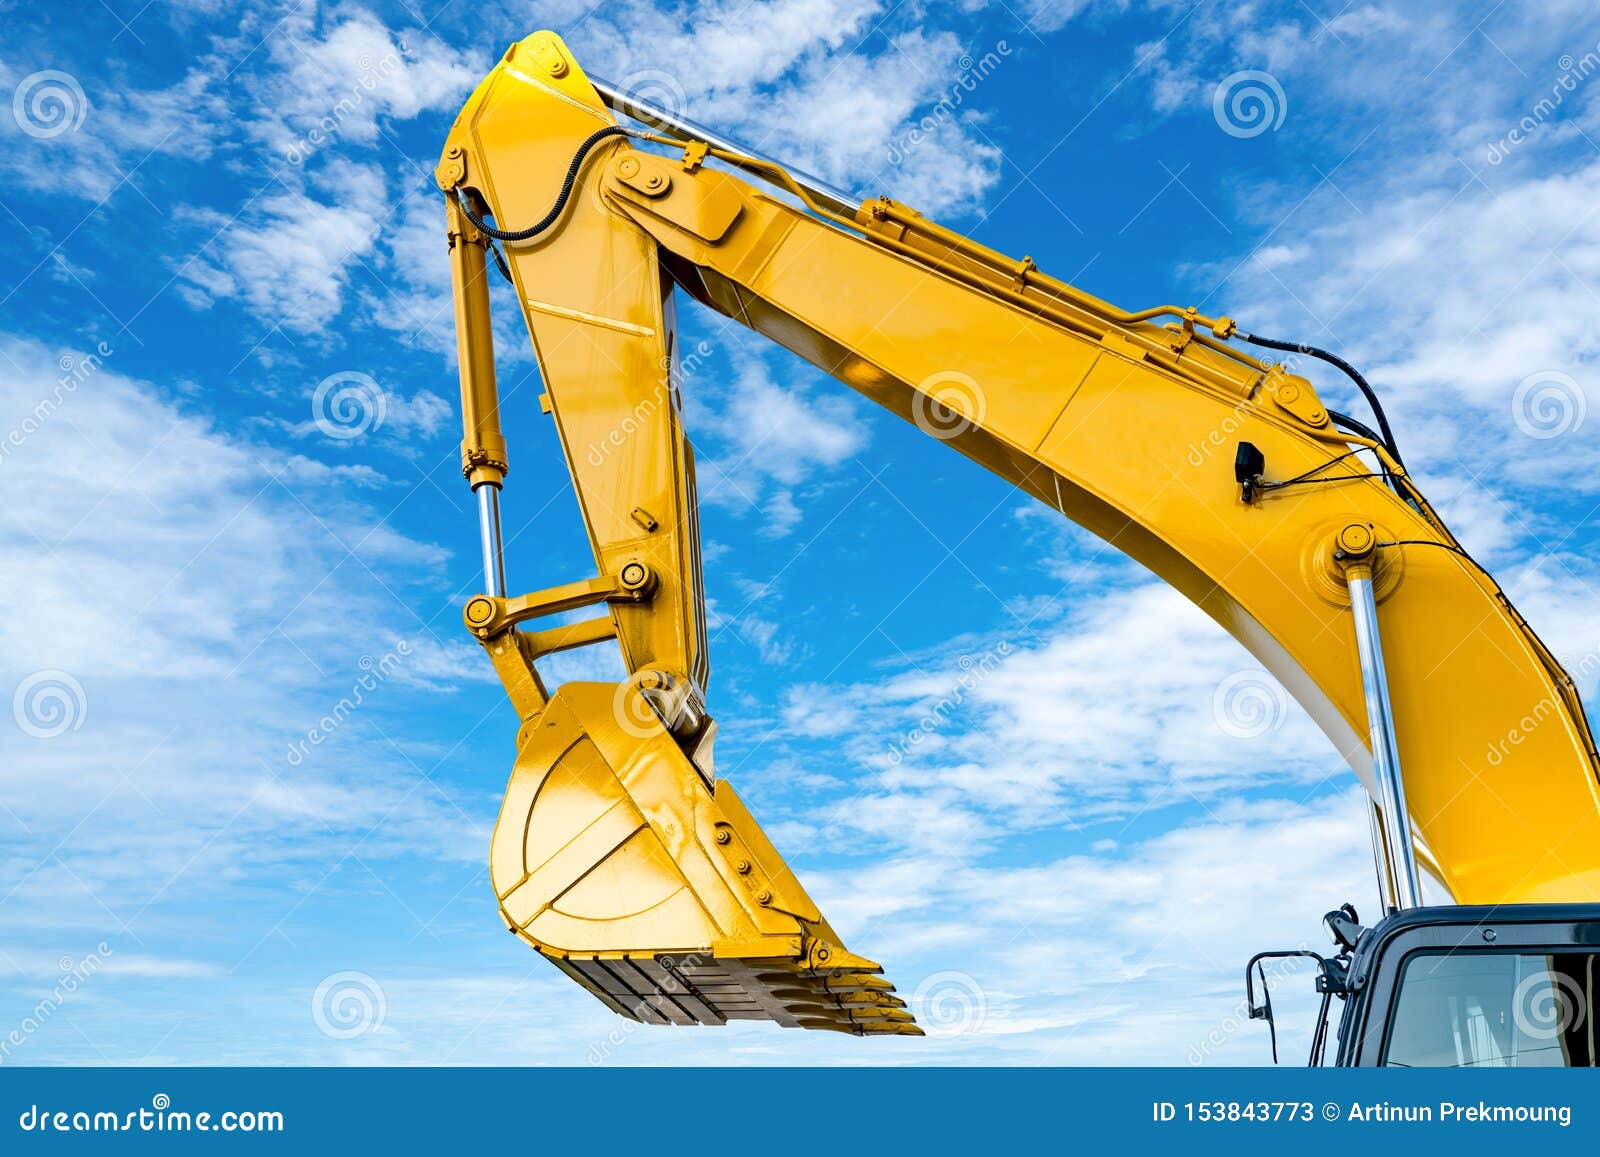 yellow backhoe with hydraulic piston arm against blue sky. heavy machine for excavation in construction site. hydraulic machinery.